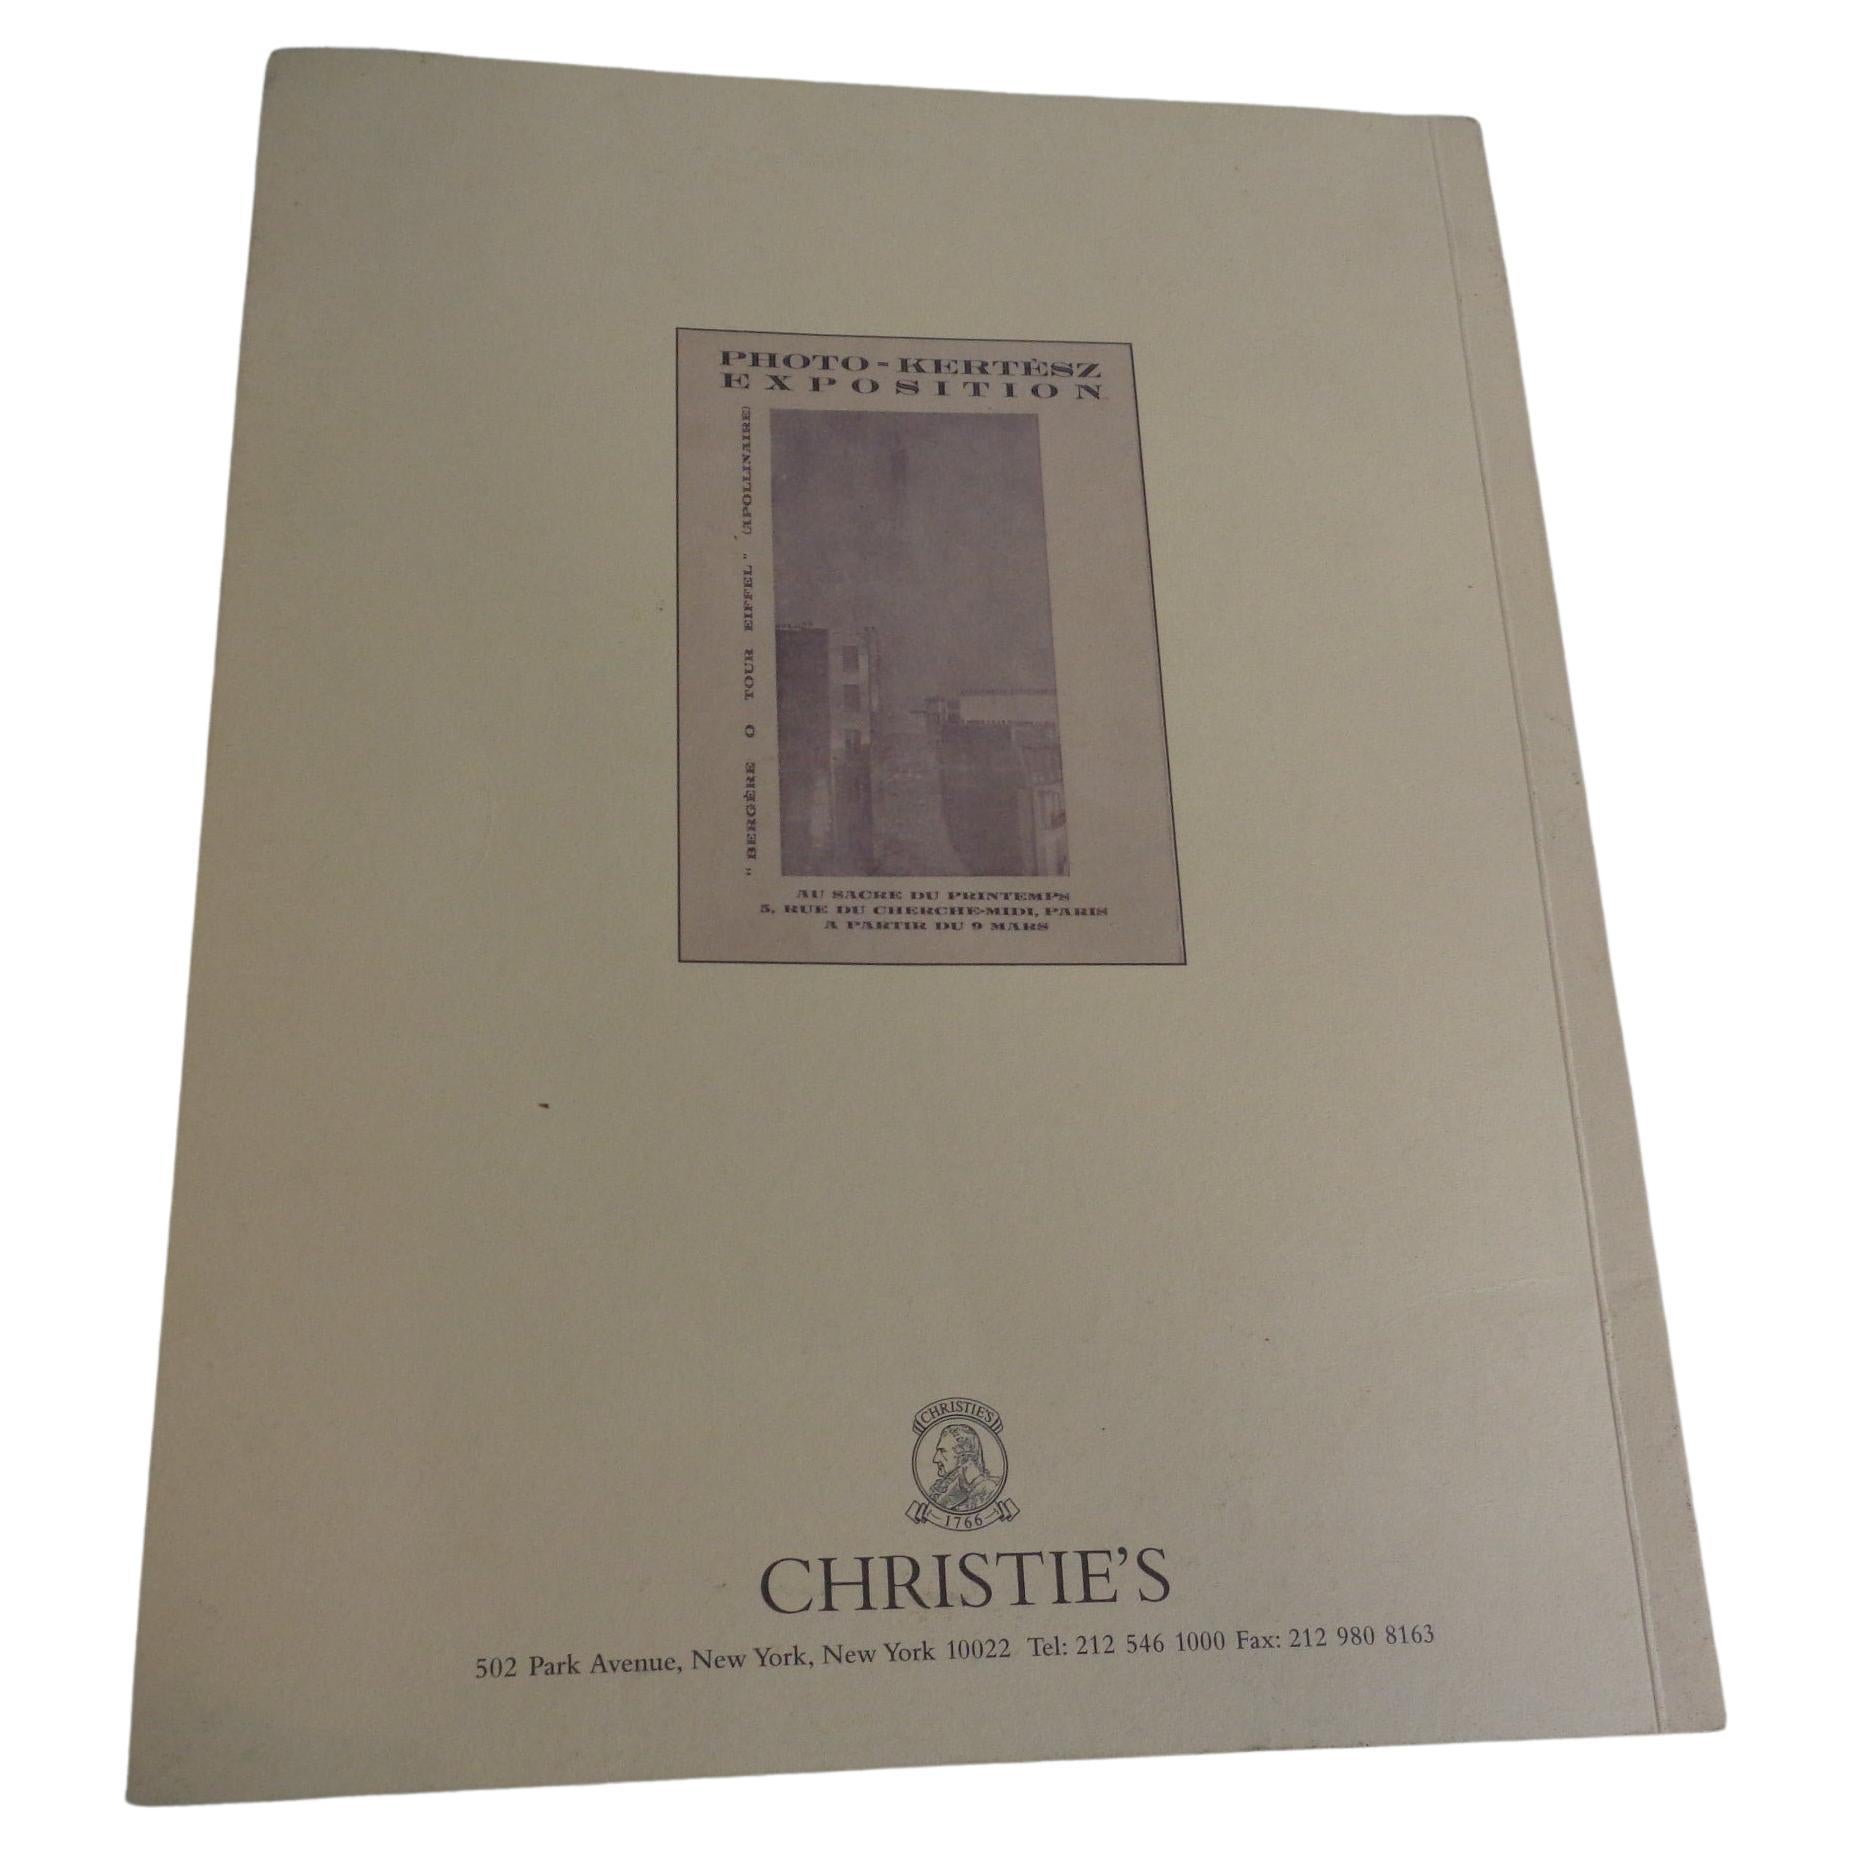 An Important Collection of Andre Kertesz Vintage Photographs - Paris and Hungary, 1919 - 1927 / 1997 Christie's, New York - 1st Edition Auction Catalog. 37 lots of one of the most significant private collections of the work of the 20th century